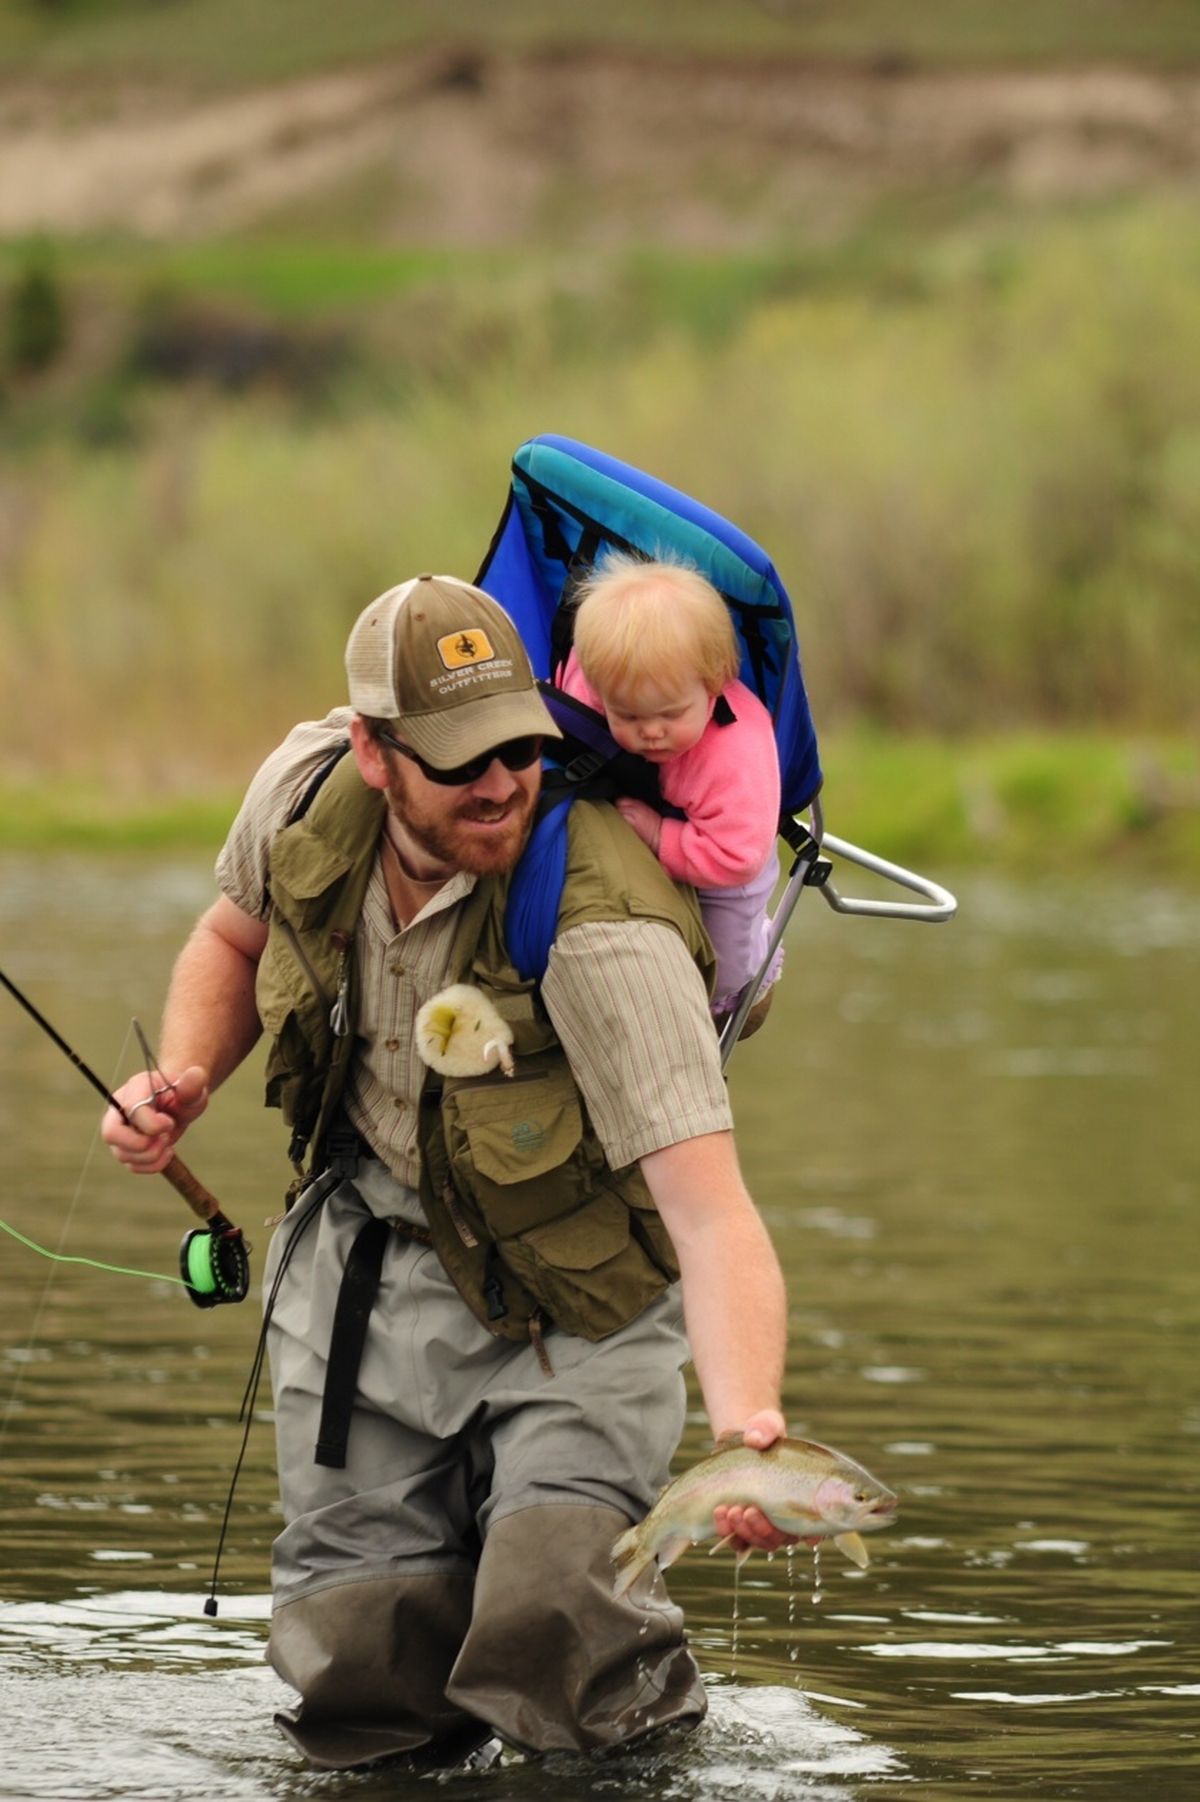 Now: Former GSL place-kicking record holder Randy Jones has his daughter for company on a fly fishing excursion.